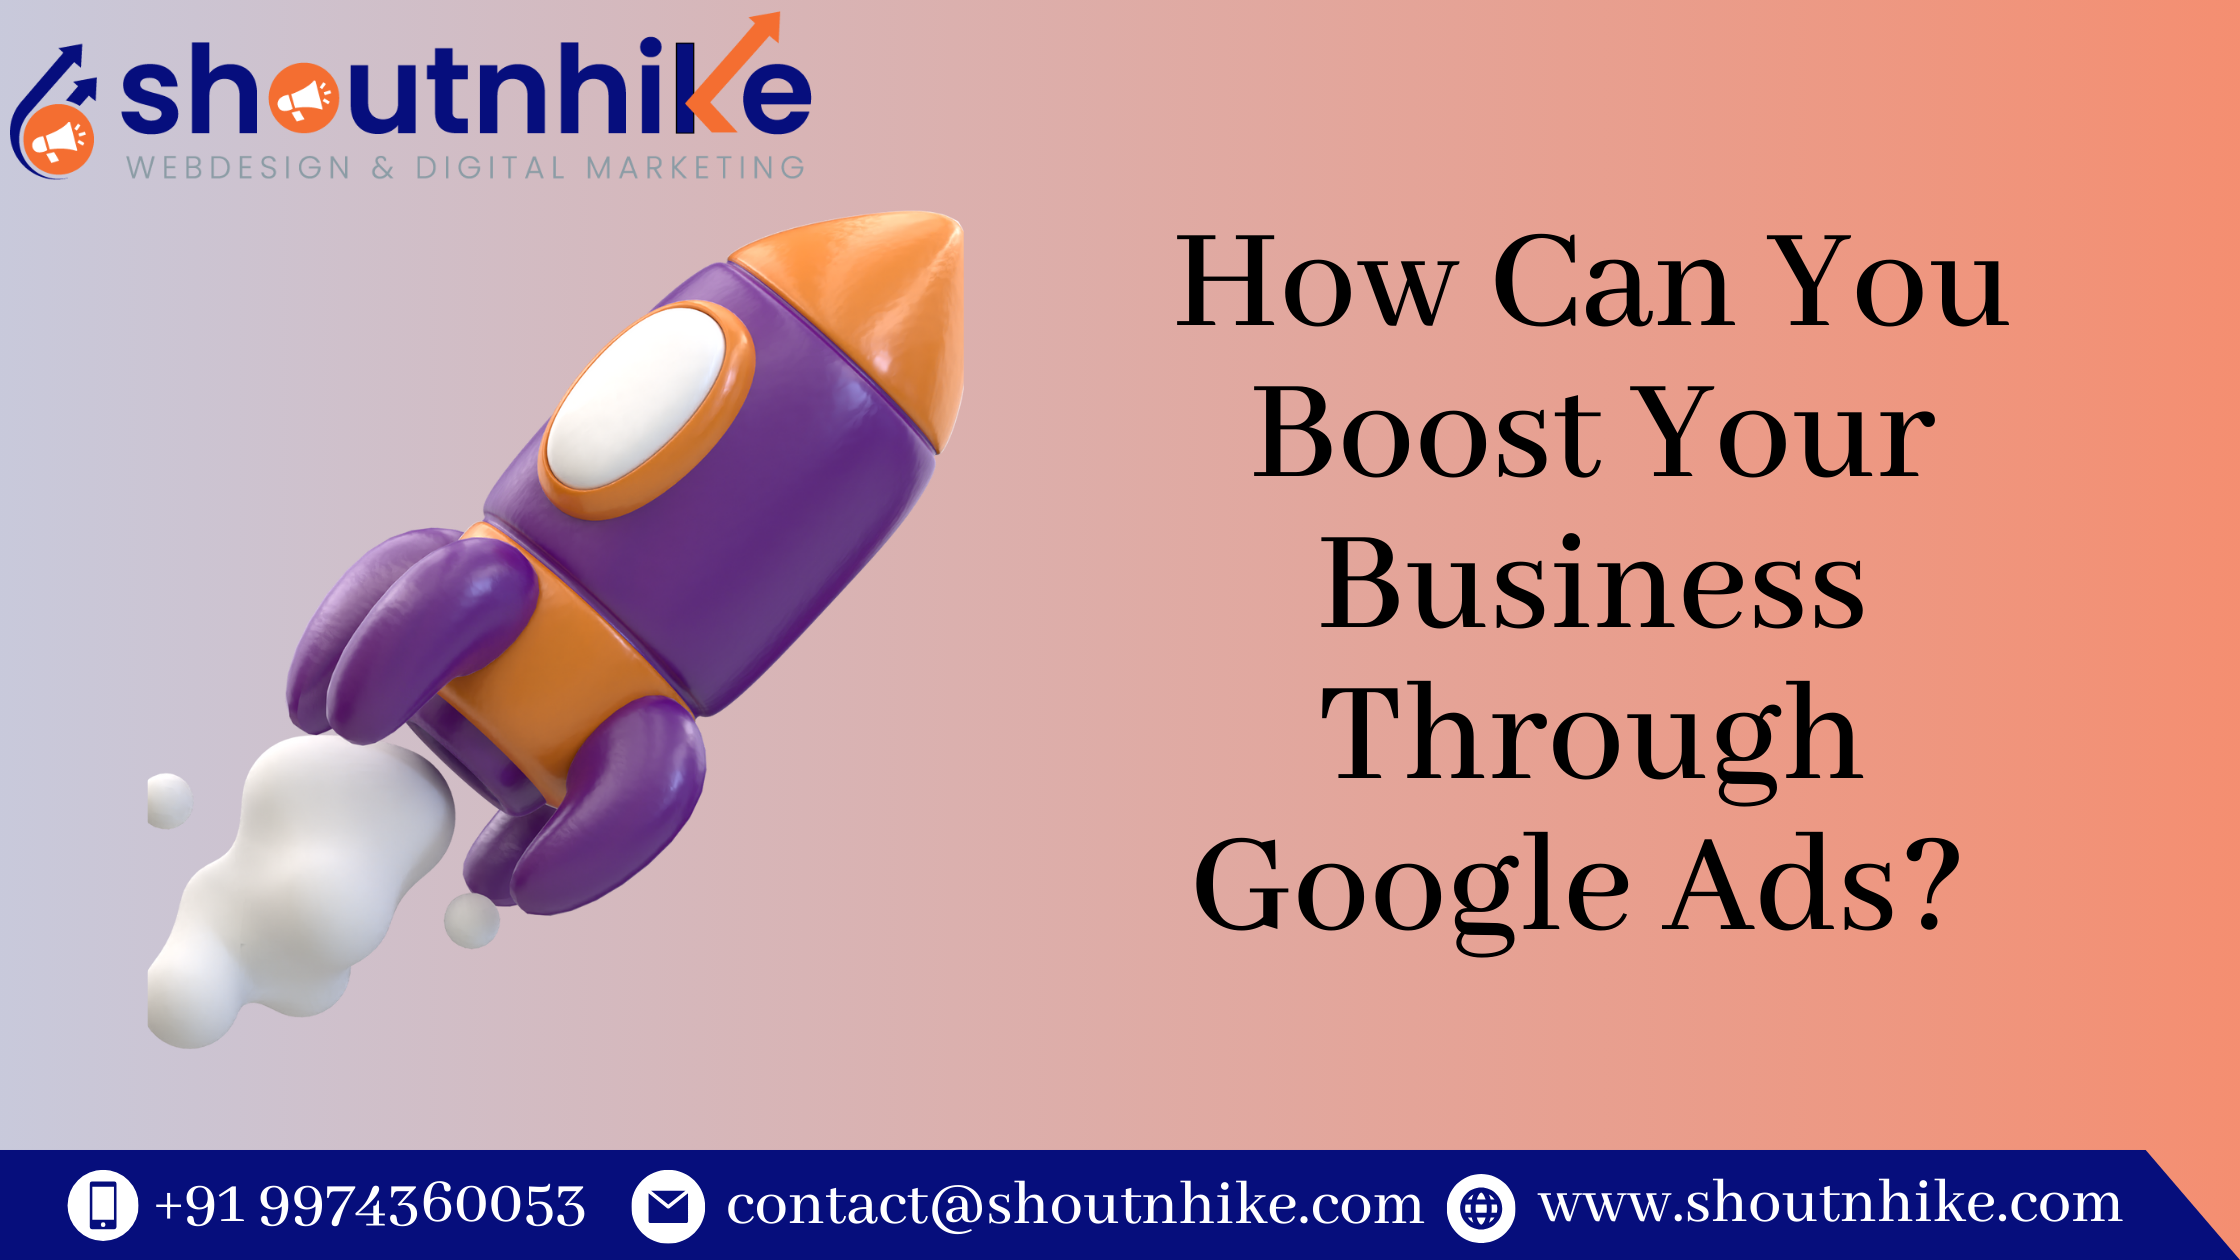 How Can You Boost Your Business Through Google Ads?